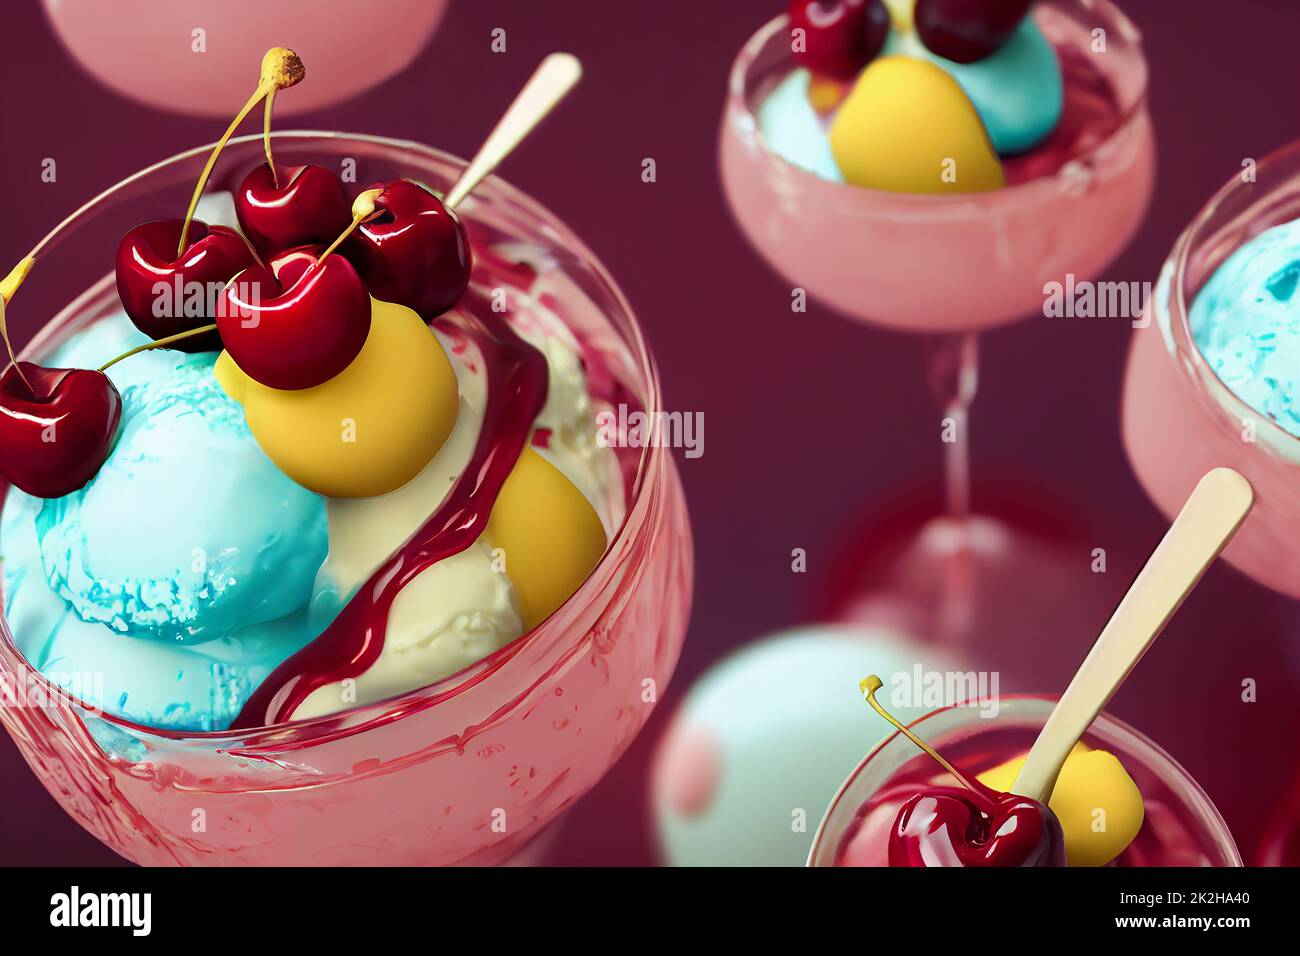 Delicious ice cream sundae with glistening cherries and chocolate syrup in a bowl, food photography and illustration Stock Photo